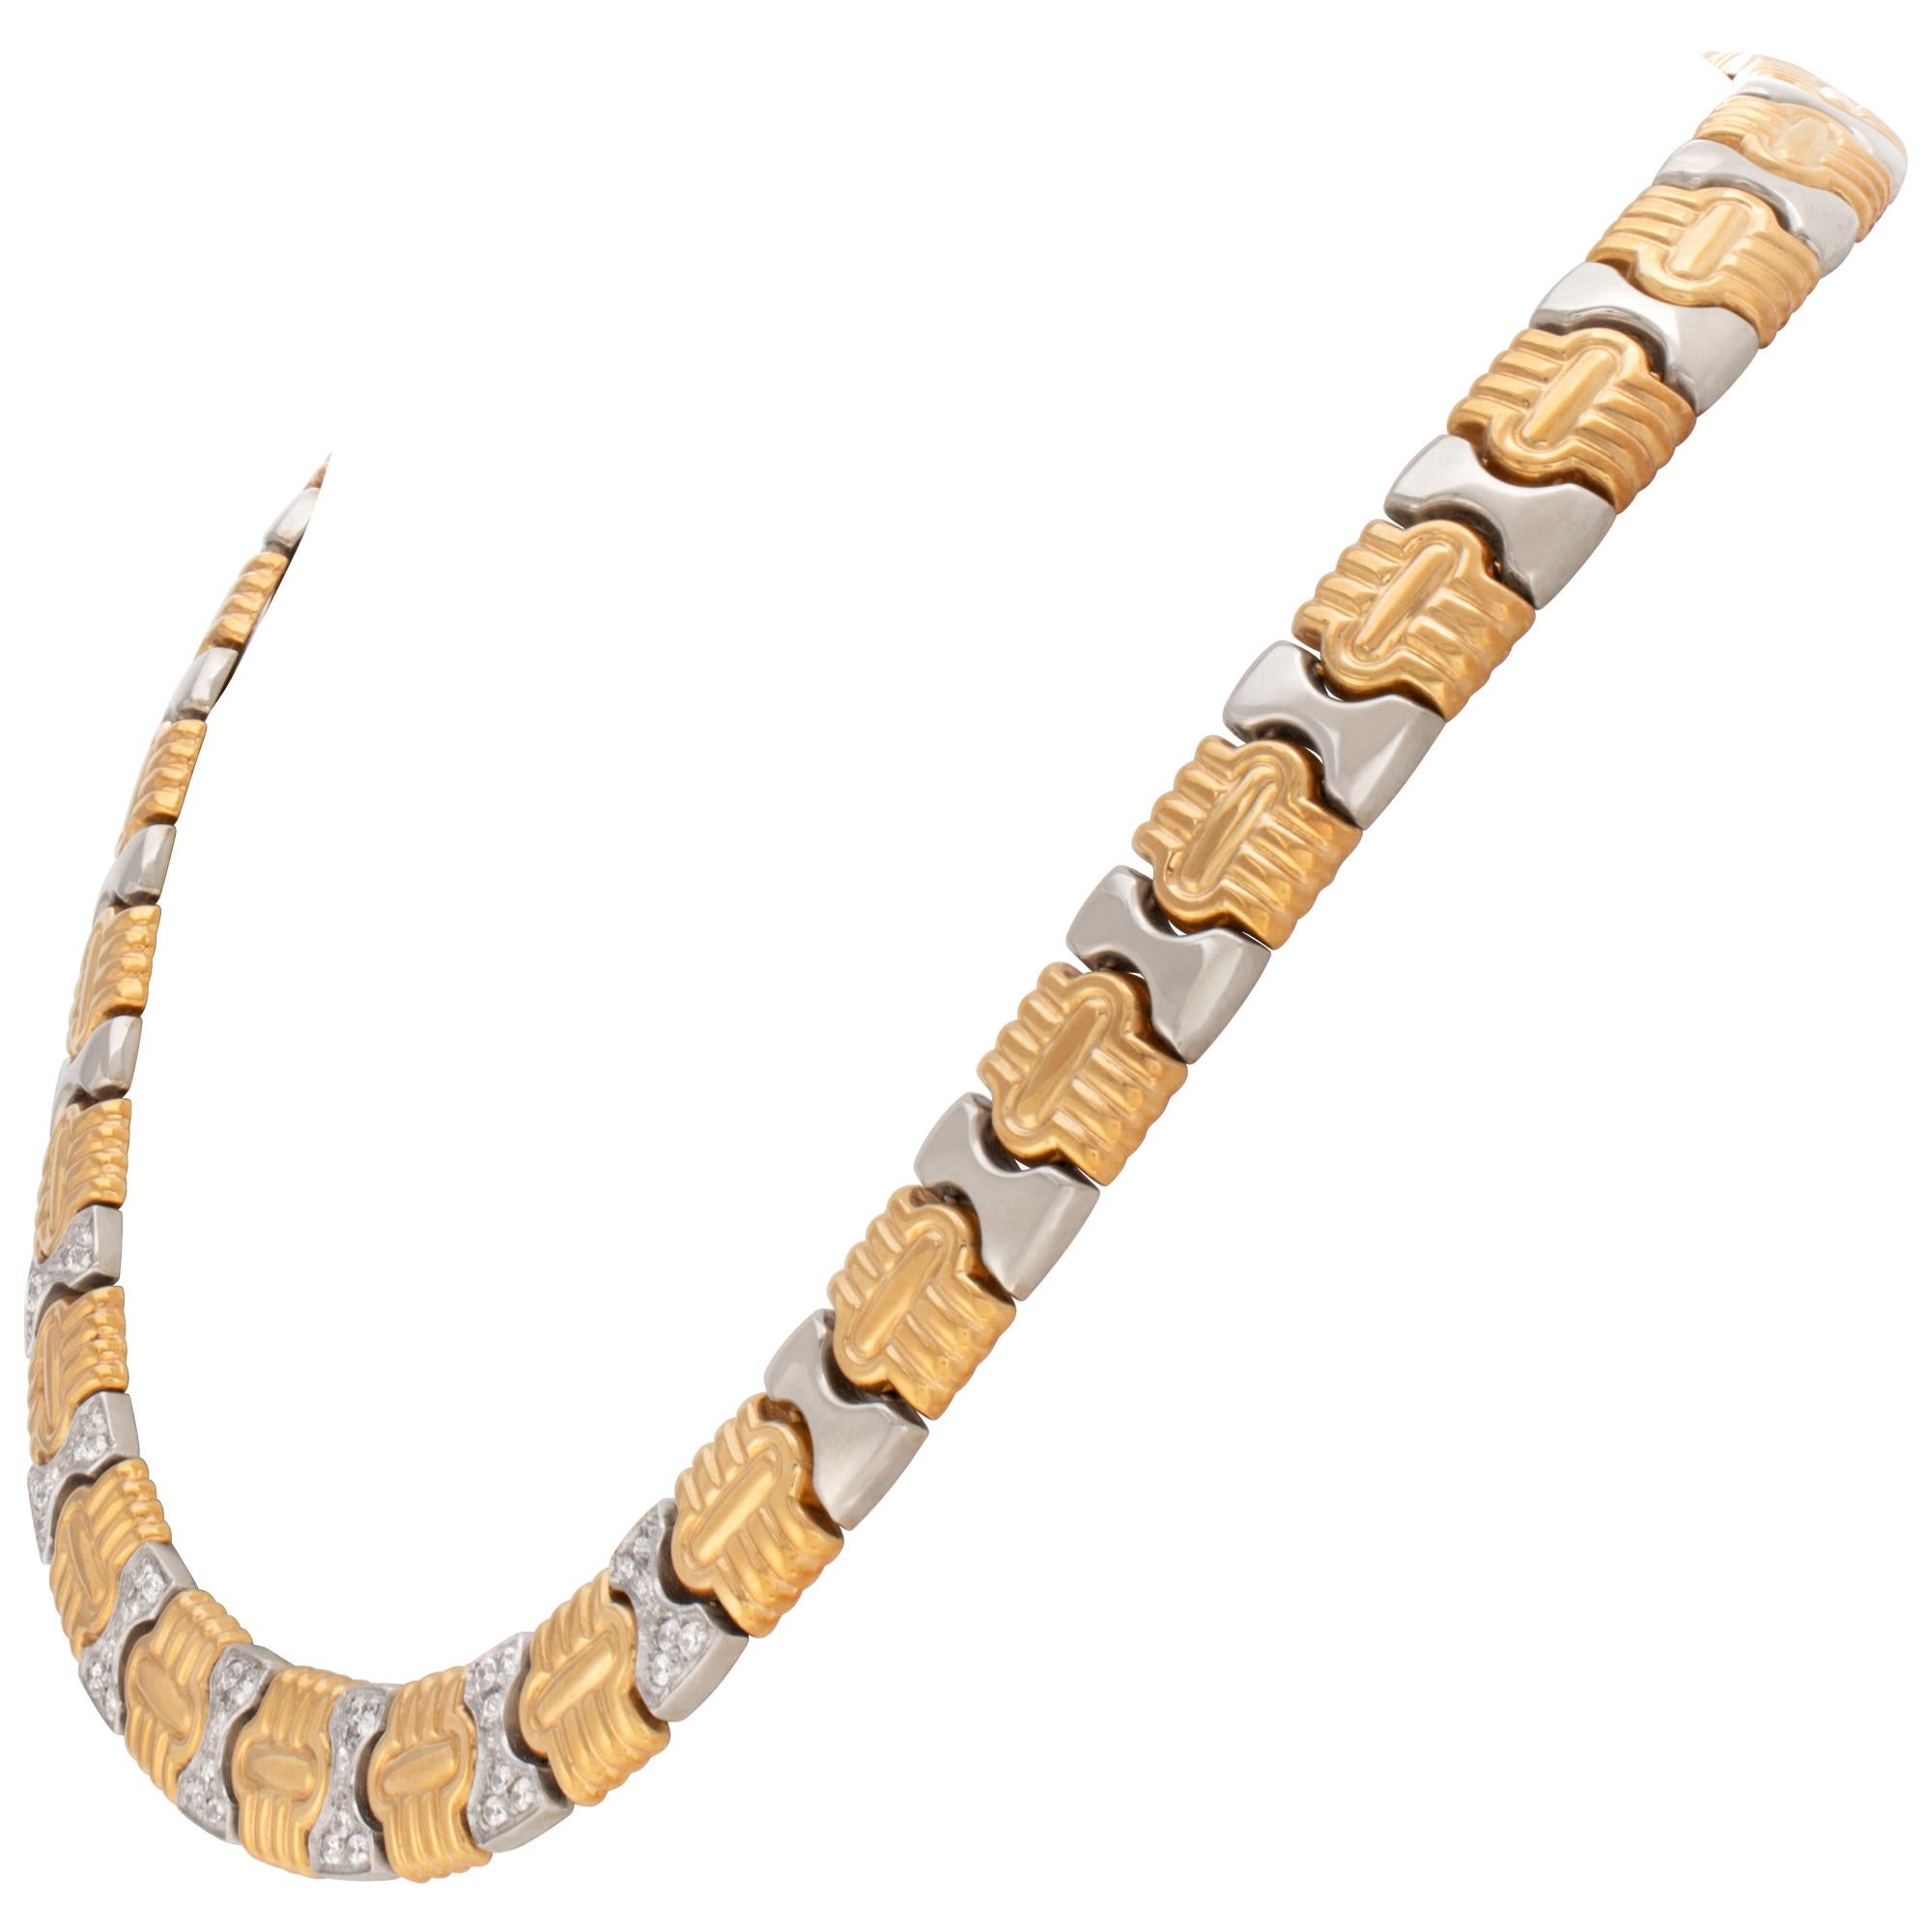 Diamond necklace in 18k white and yellow gold with 0.50 carats in diamonds. Length 18 inches. Width 12 mm.
